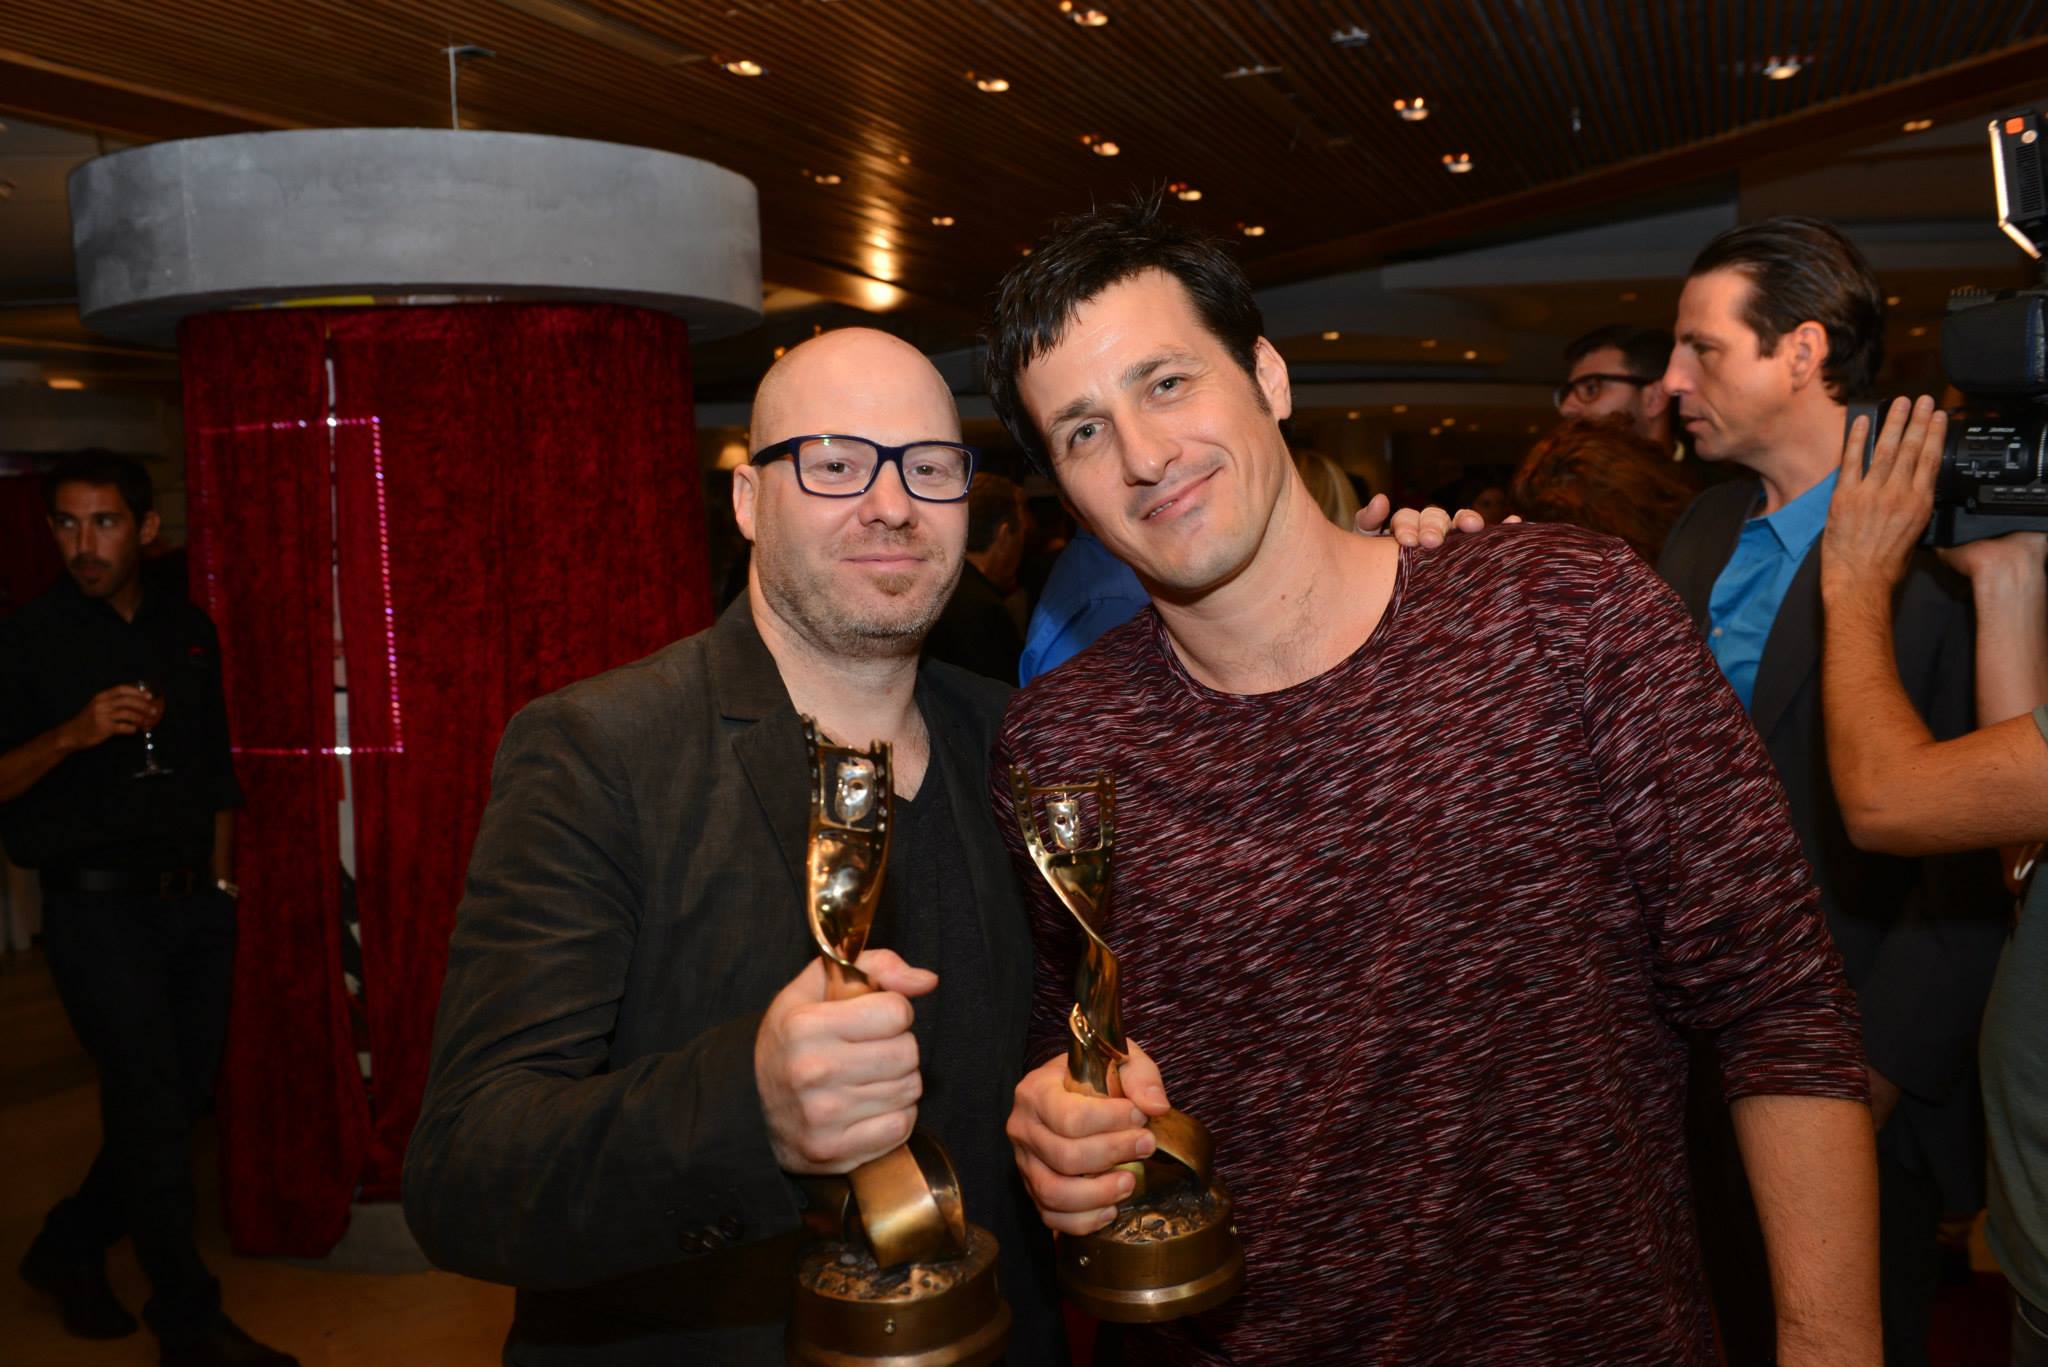 Composer Frank Ilfman and sound supervisor Ronen Nagel at the Israeli Film Academy Awards, winning best music and sounds for the movie Big Bad Wolves